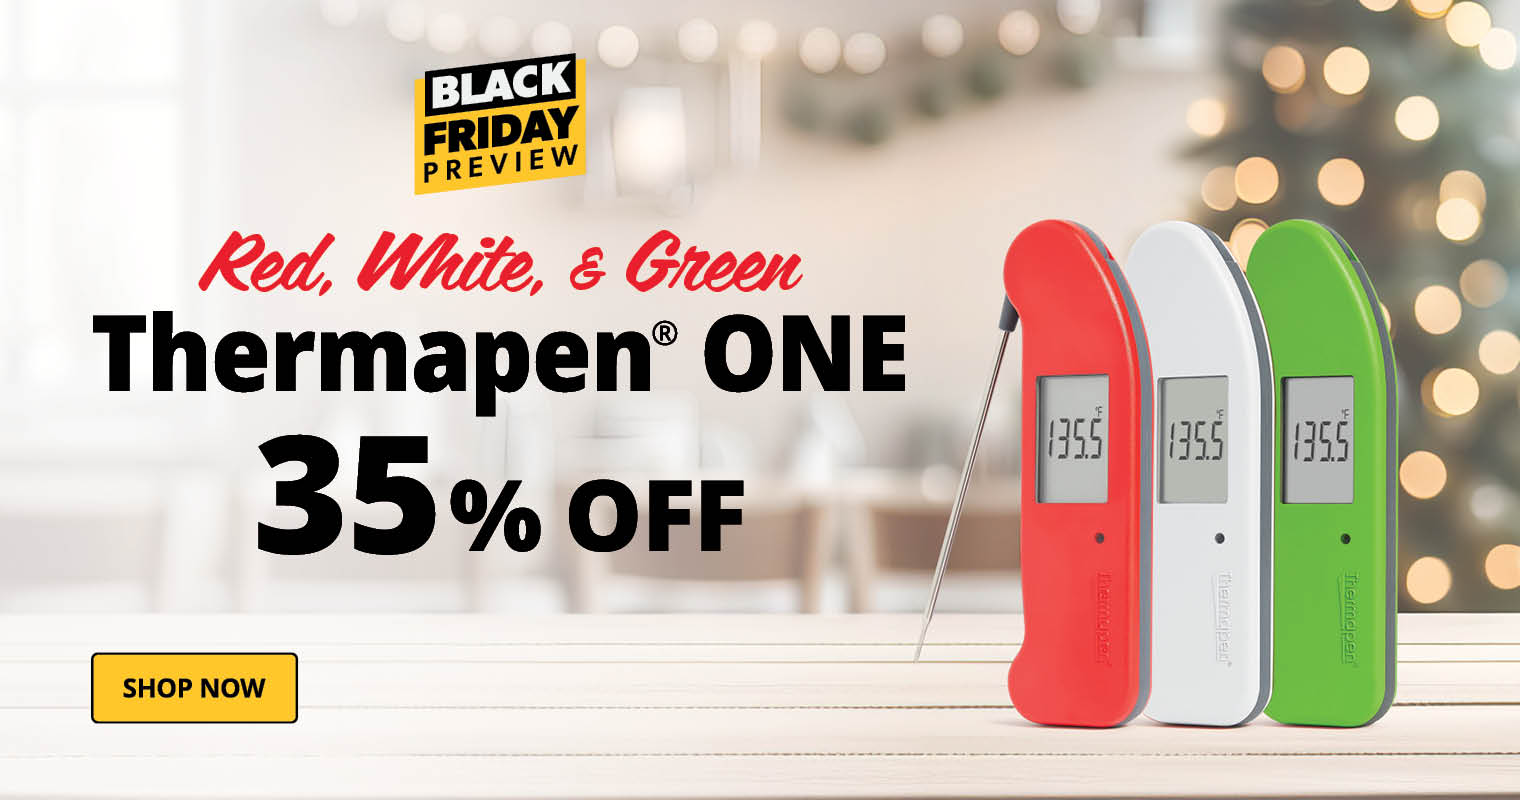 Last Day! $67.97 Thermapen ONE Open Box Sale - ThermoWorks